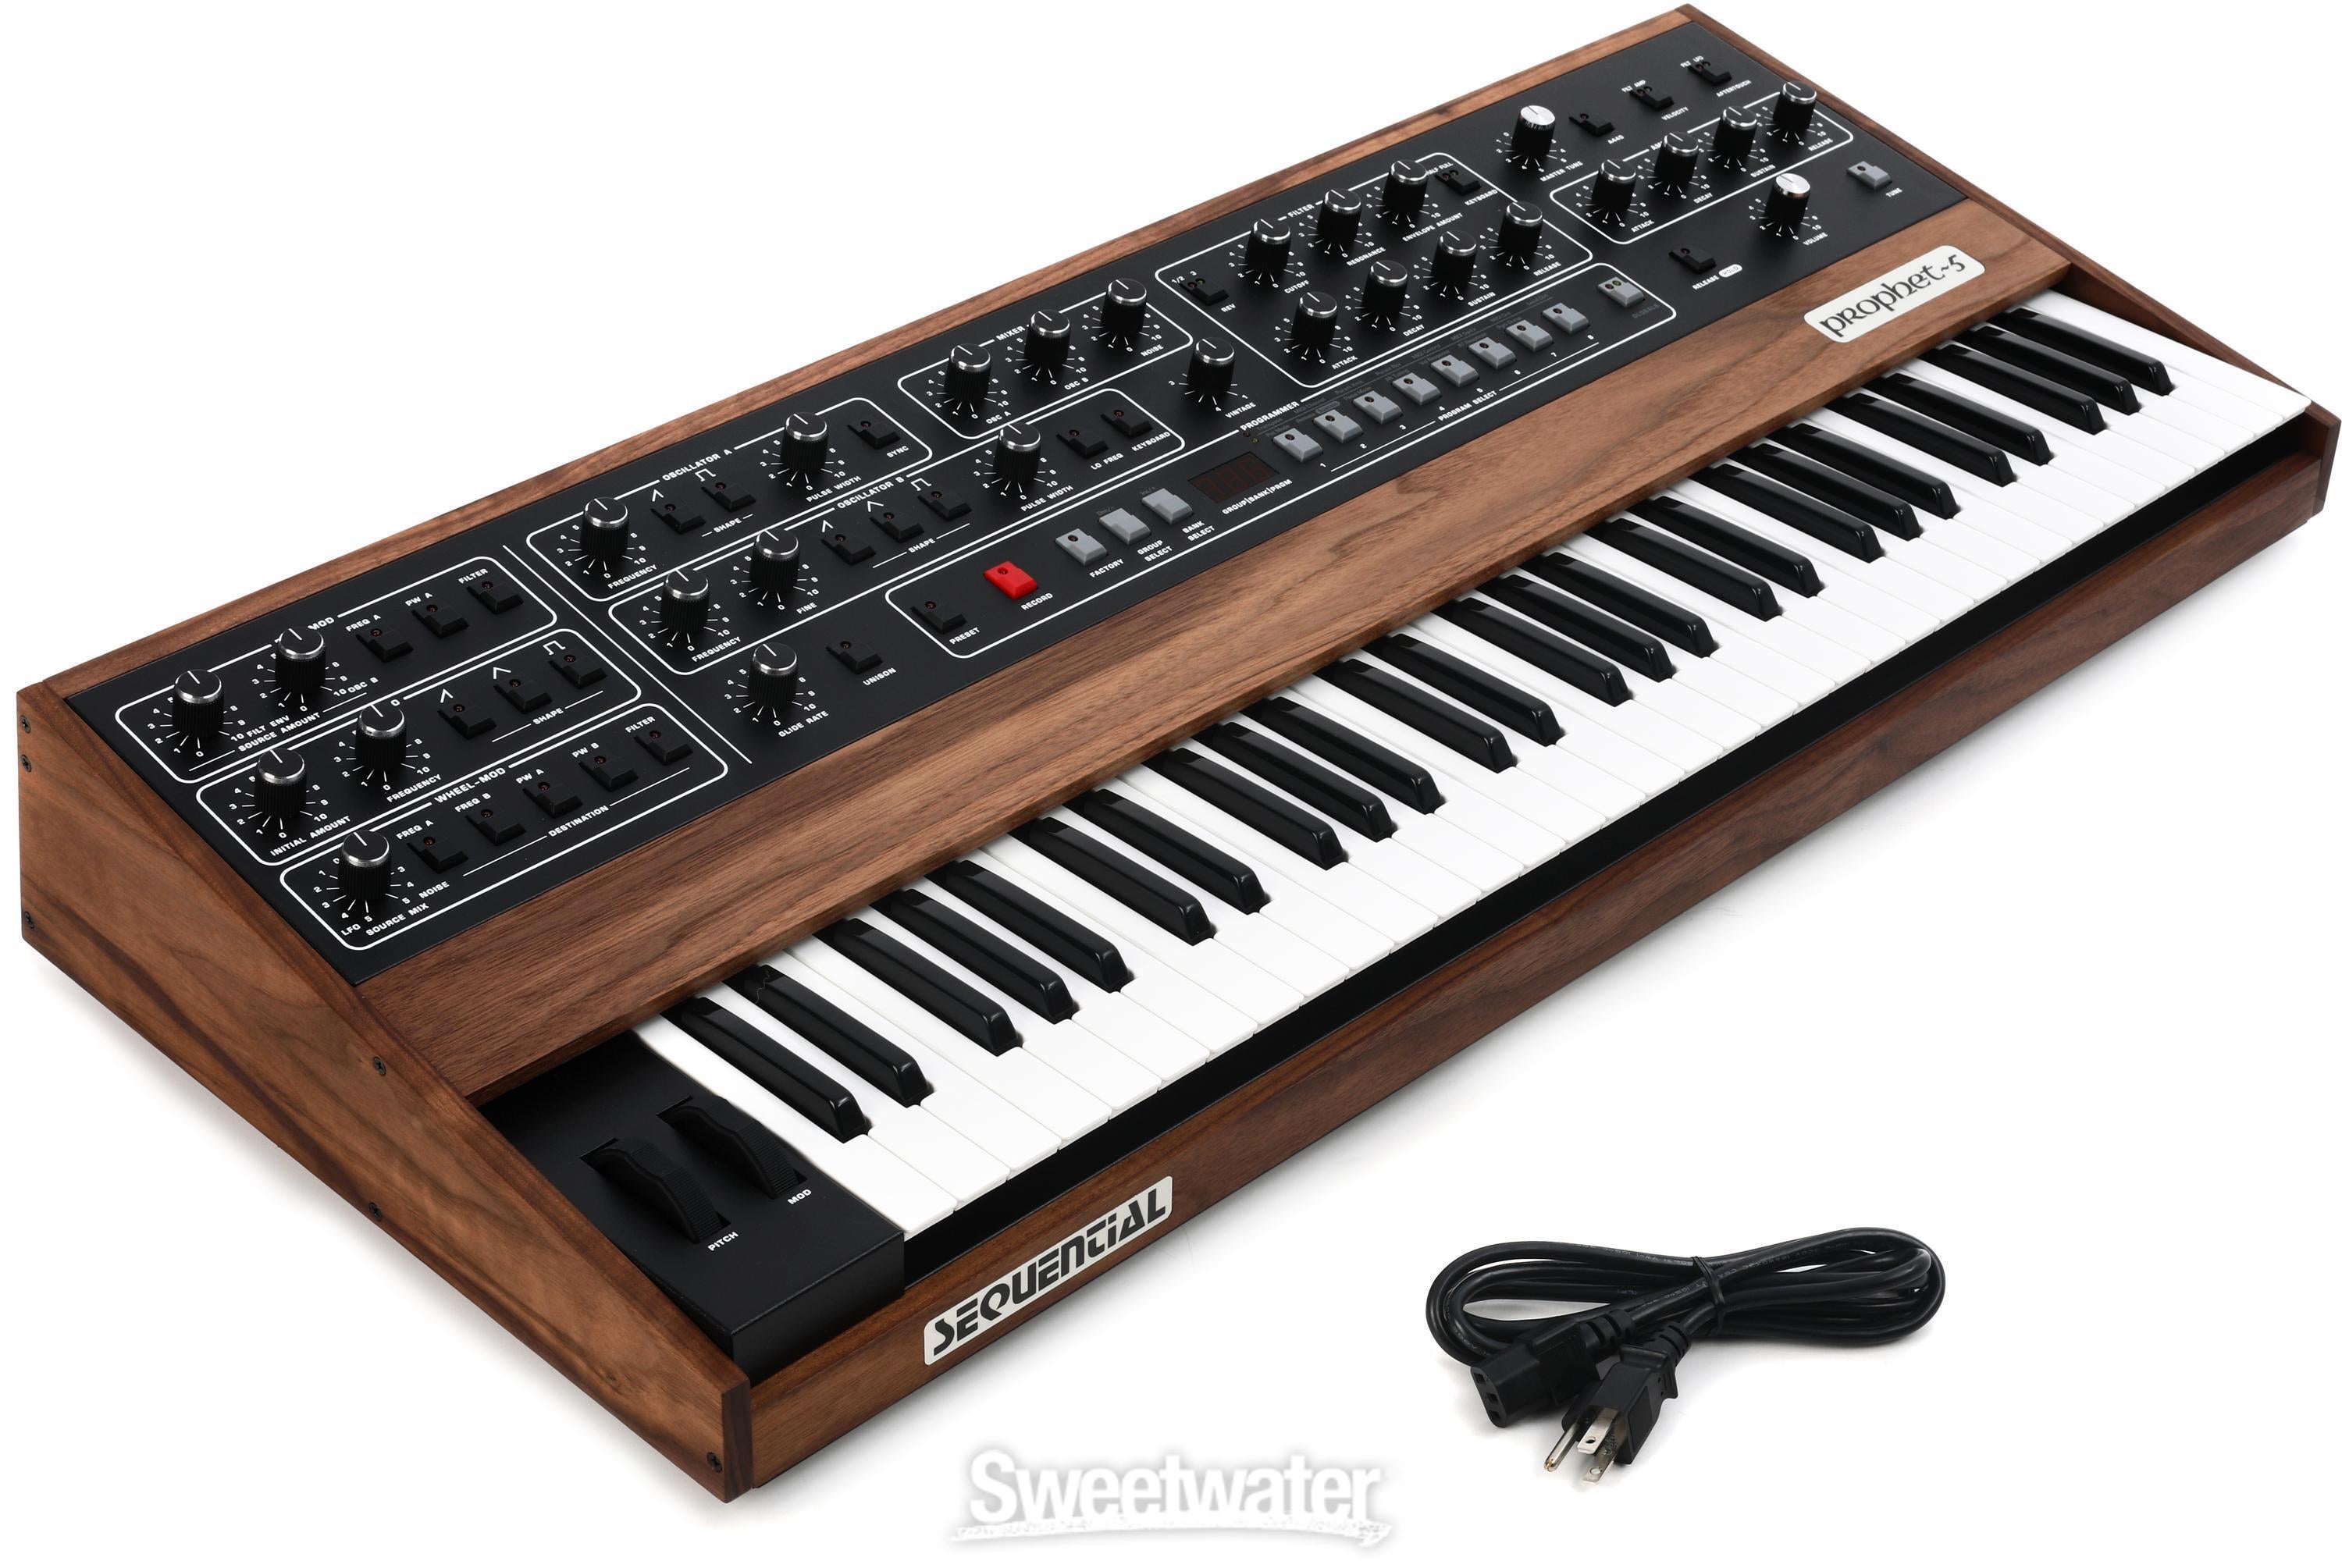 Sequential Prophet-5 61-key Analog Synthesizer | Sweetwater